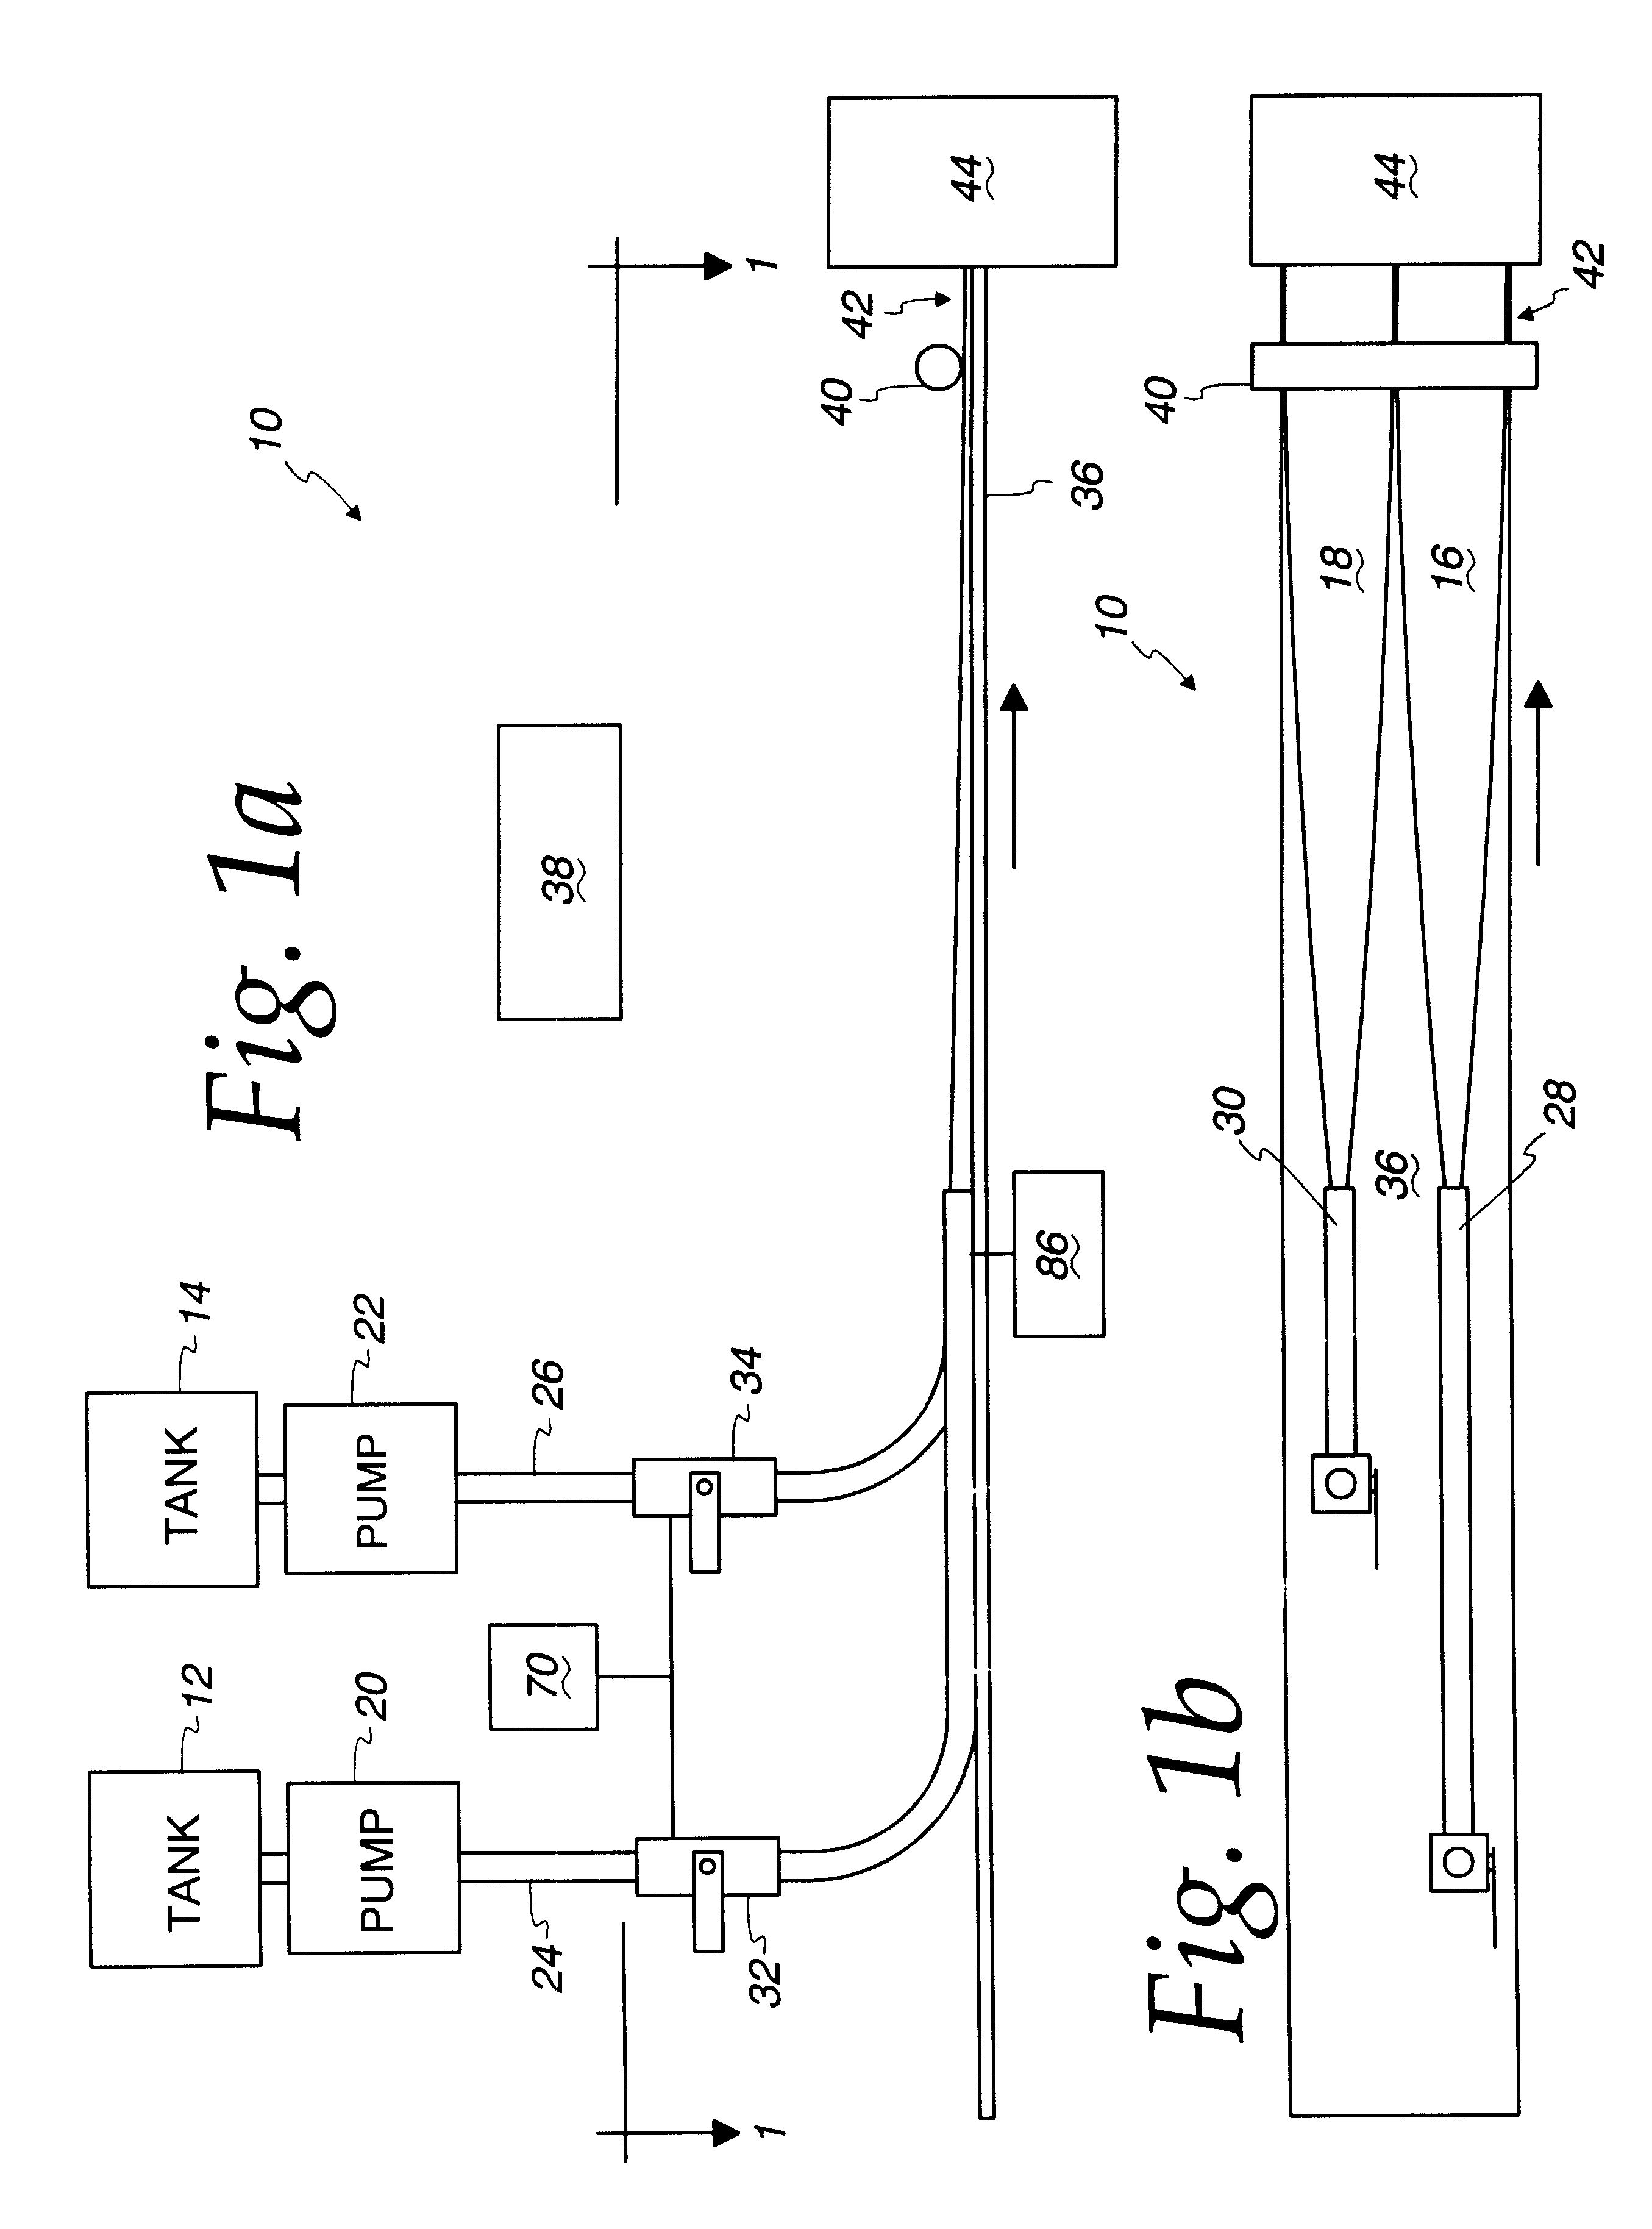 Method for continuous manufacture of multi-colored and/or multi-flavored food product